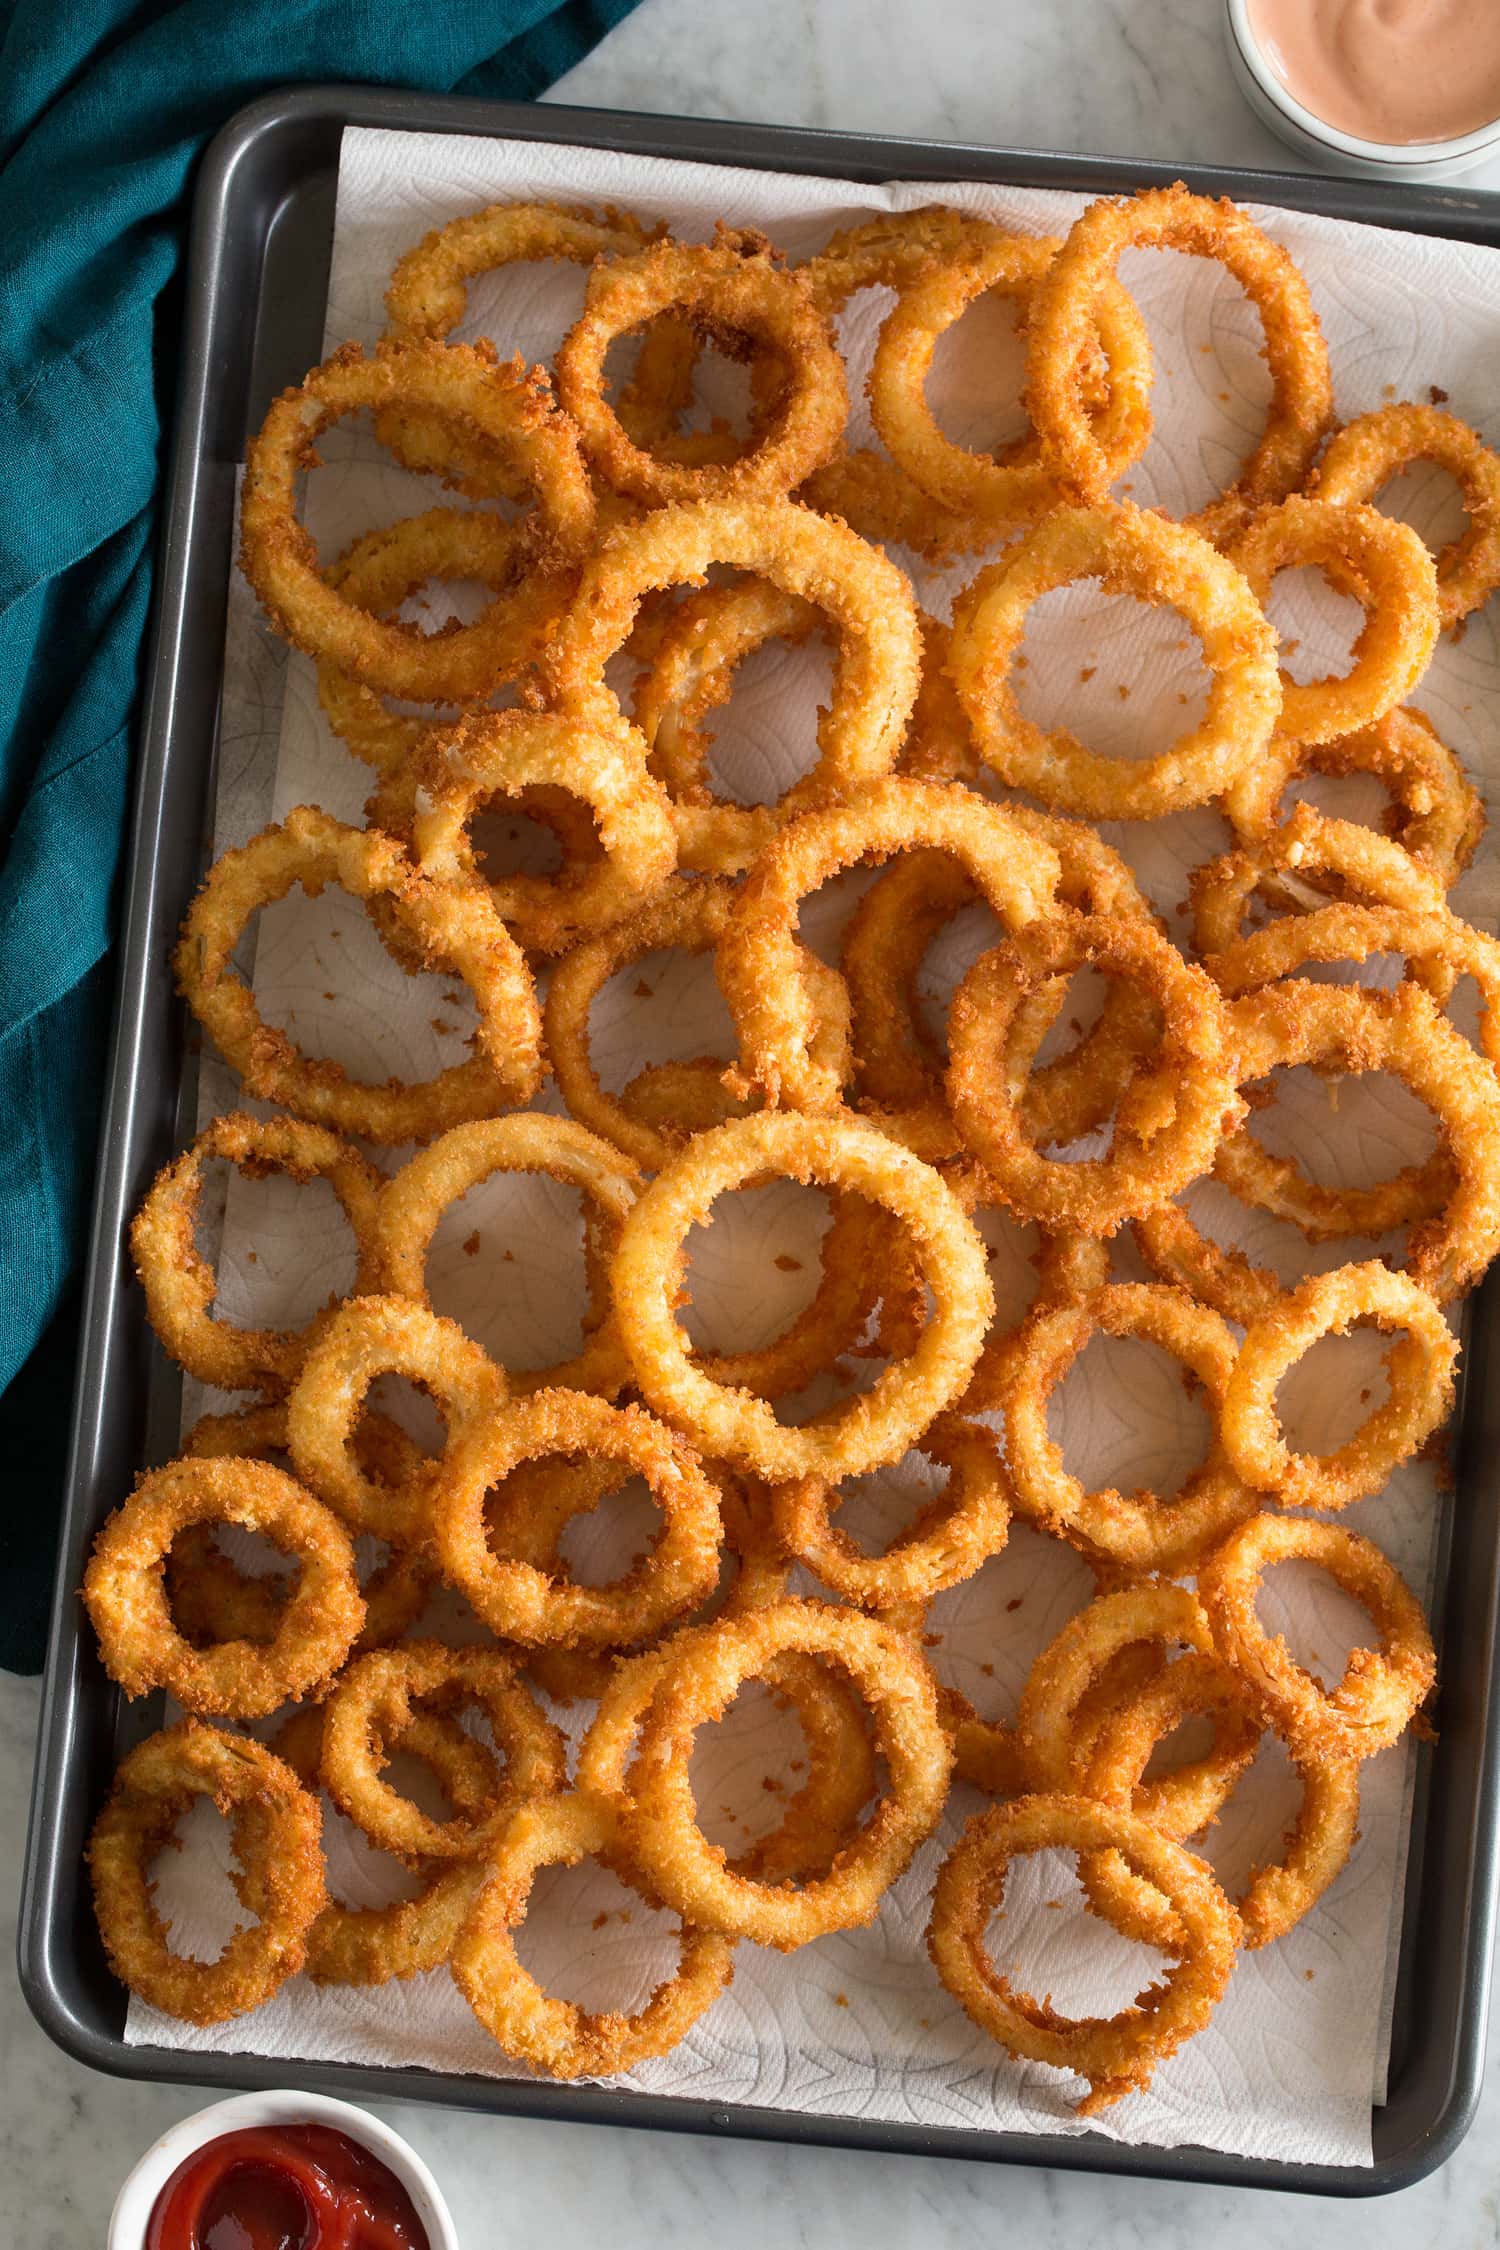 Fried onion rings over paper towels on a baking sheet.